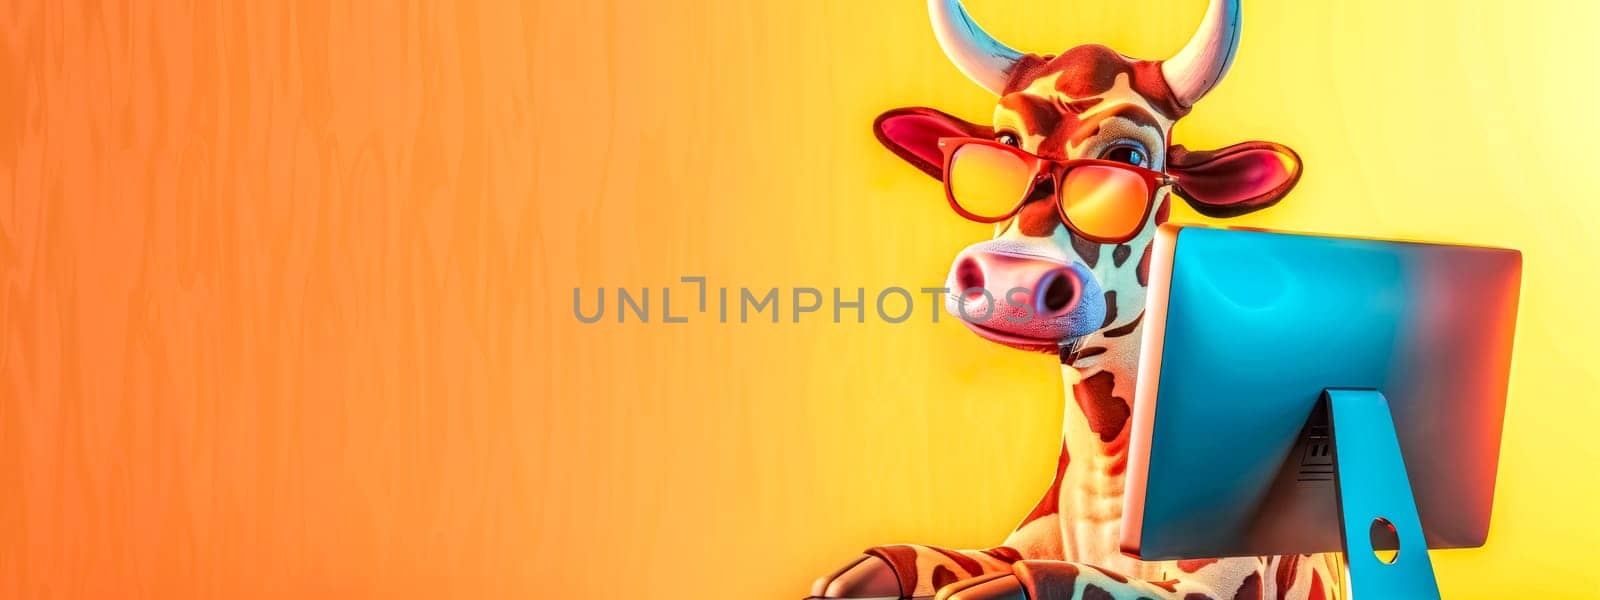 Tech-savvy cow with glasses using a computer on colorful background by Edophoto